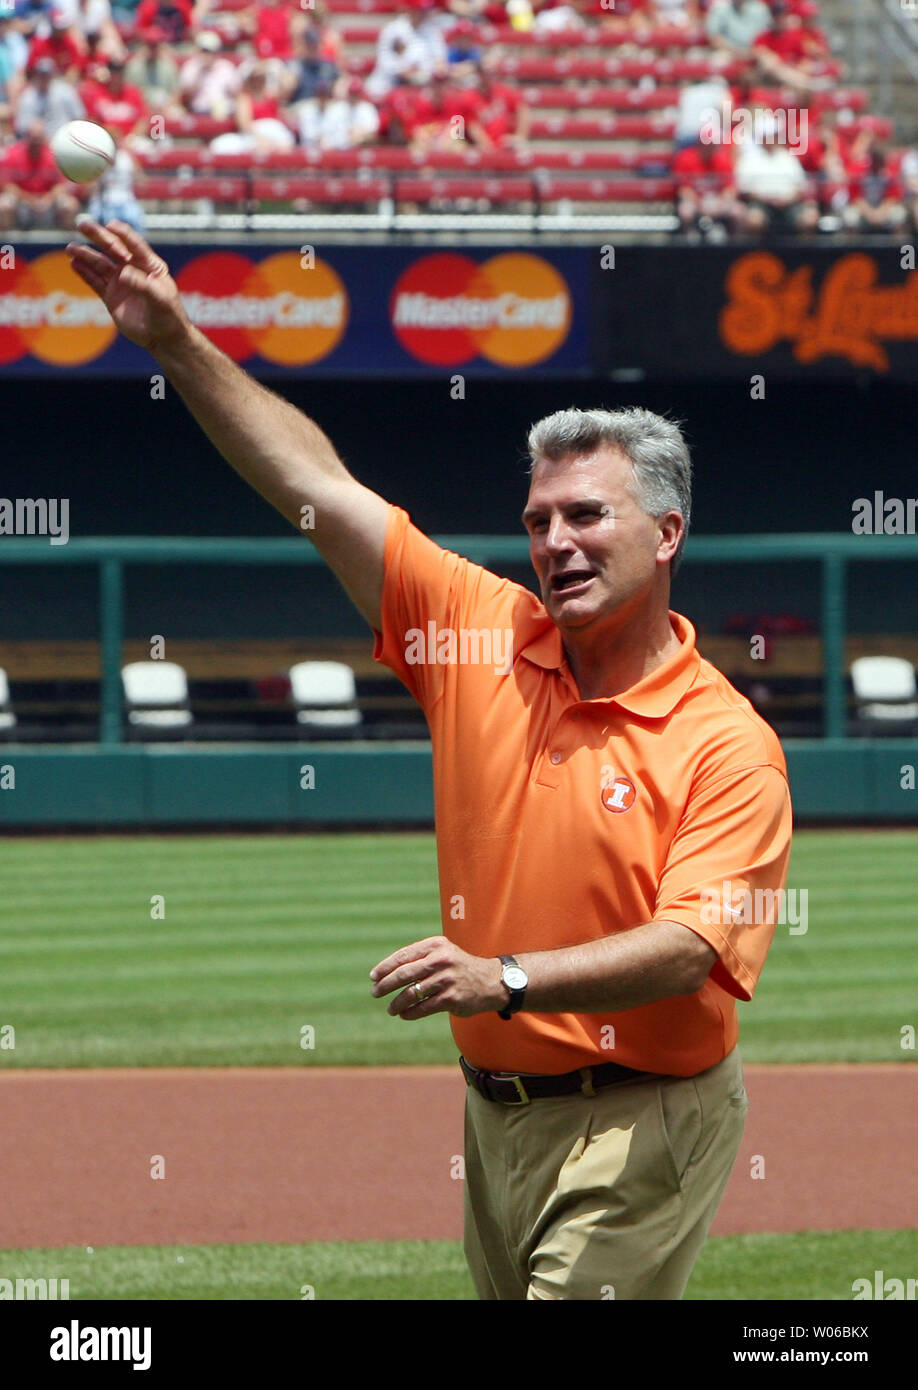 University of Illinois' head basketball coach Bruce Weber throws out a ceremonial first pitch before the Philadelphia Phillies - St. Louis Cardinals baseball game at Busch Stadium in St. Louis on June 24, 2007.   (UPI Photo/Bill Greenblatt) Stock Photo